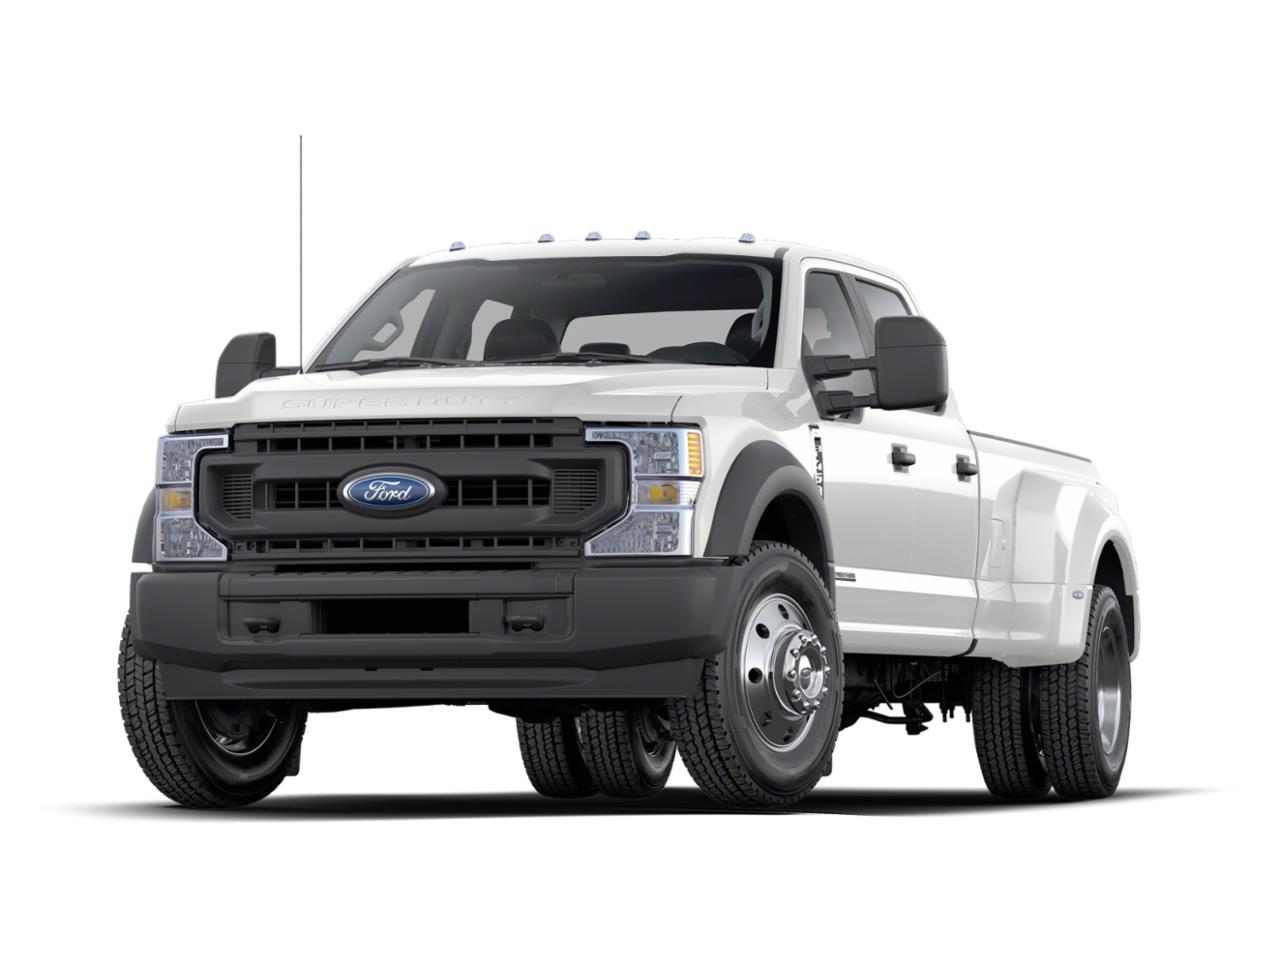 New 2022 Ford Super Duty F 450 Drw At Platinum Ford In Terrell Tx